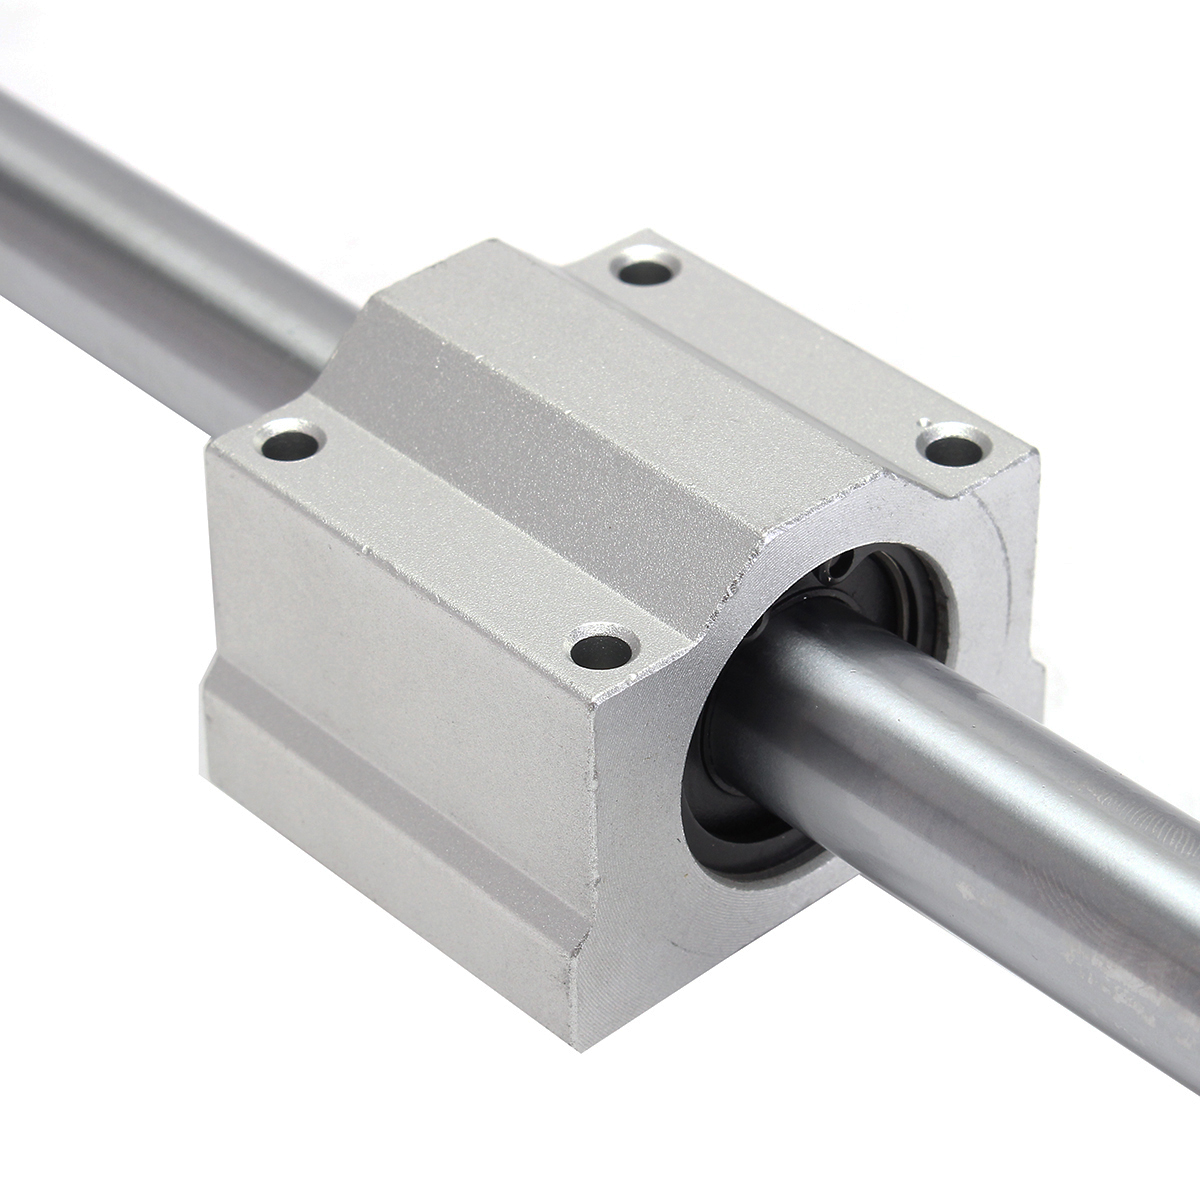 Machifit-16mm-x-1000mm-Linear-Rail-Shaft-With-Bearing-Block-and-Guide-Support-For-CNC-Parts-1390357-5